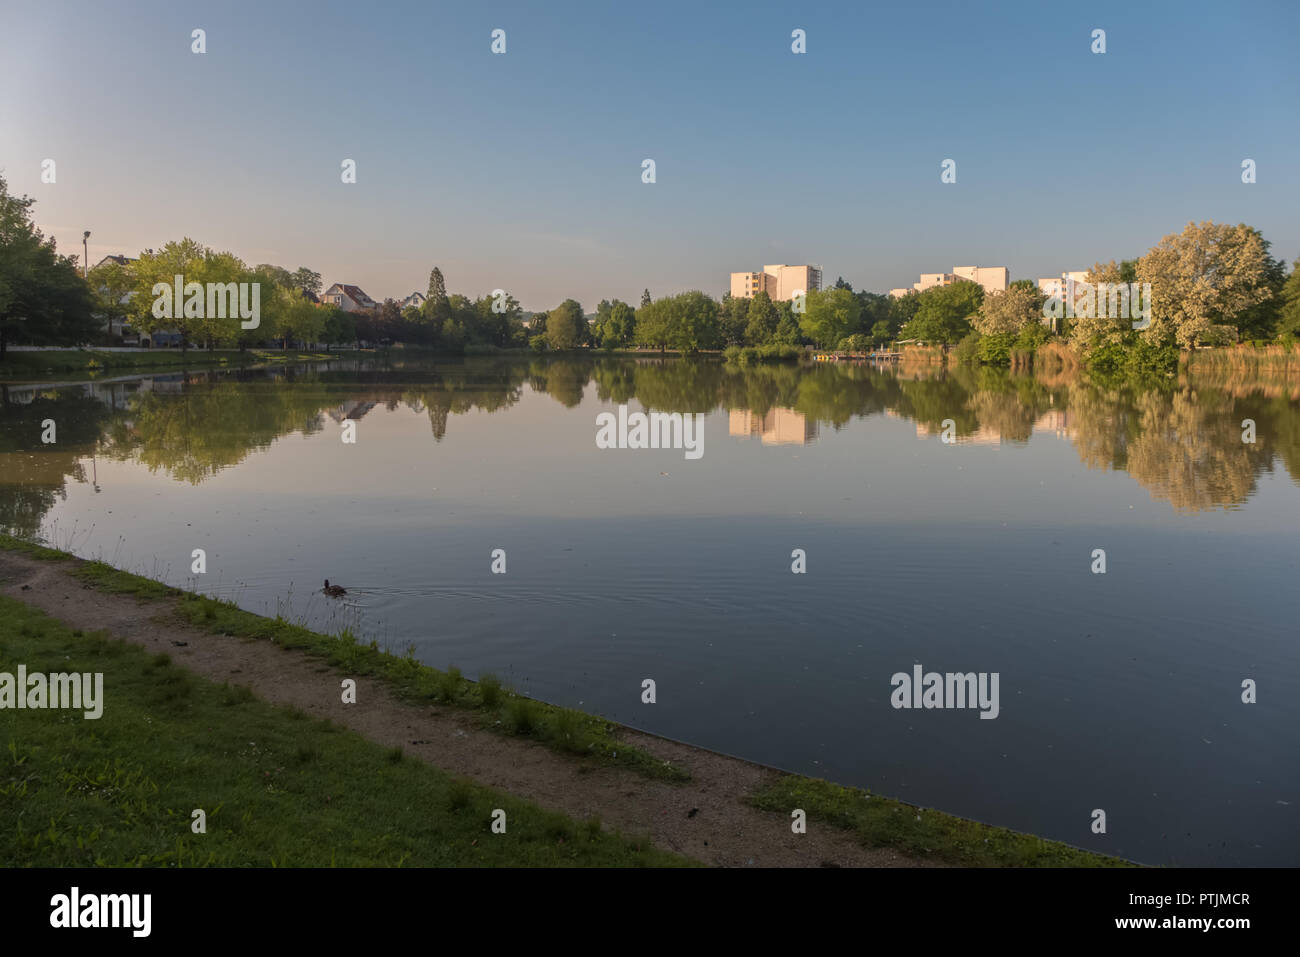 The lake in a public park of a German town Stock Photo